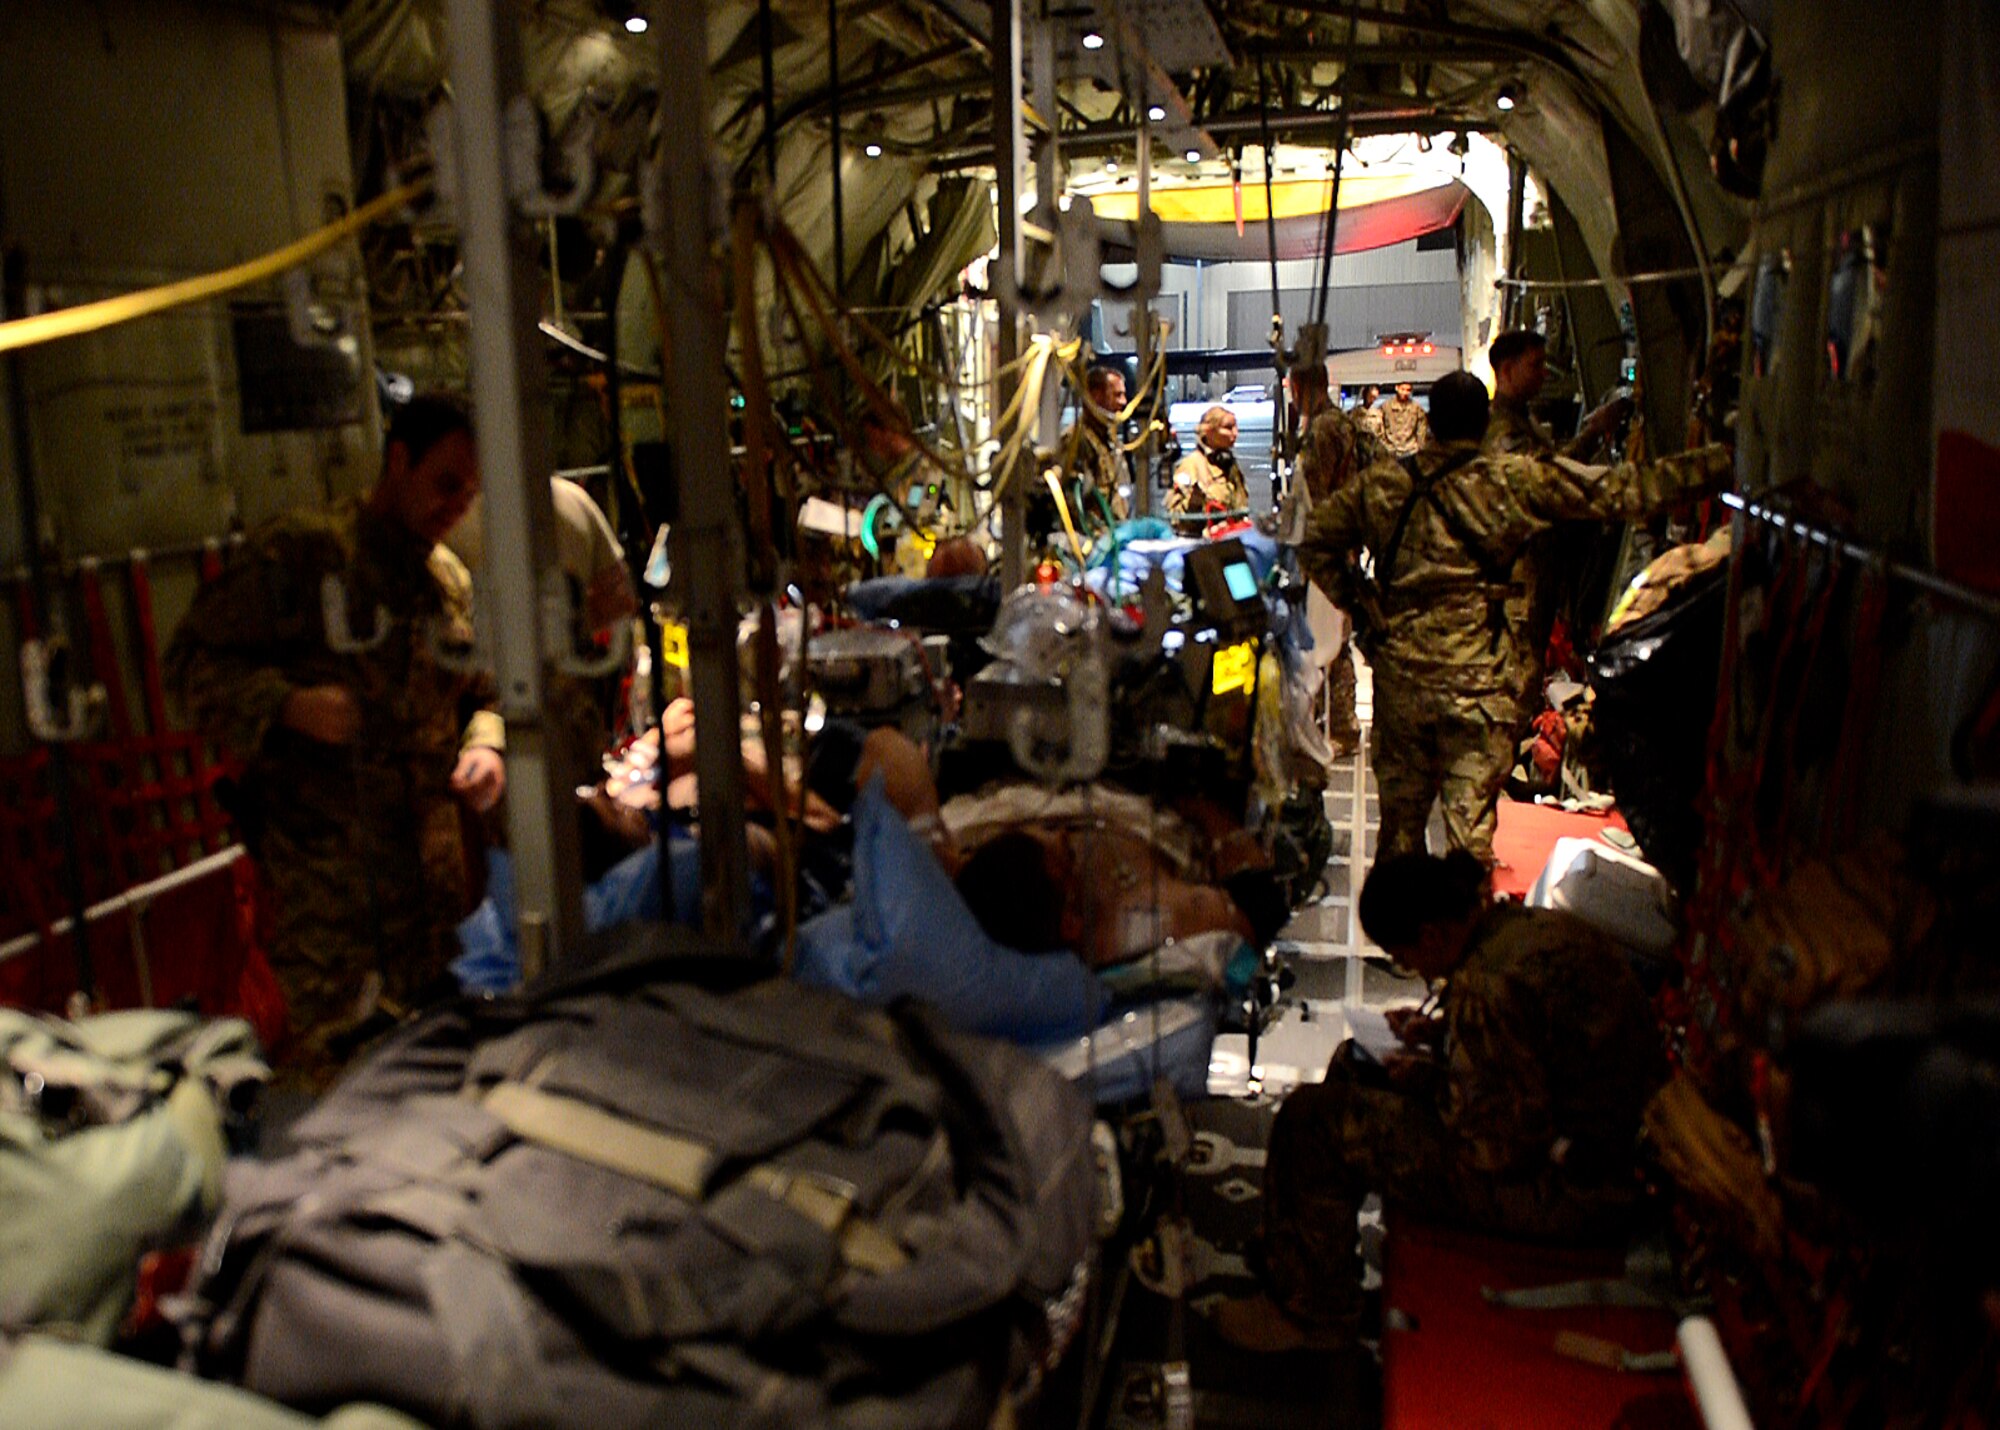 455 Expeditionary Aeromedical Evacuation Squadron Airmen prepare to unload patients at Bagram Airfield (Air Force photo).  